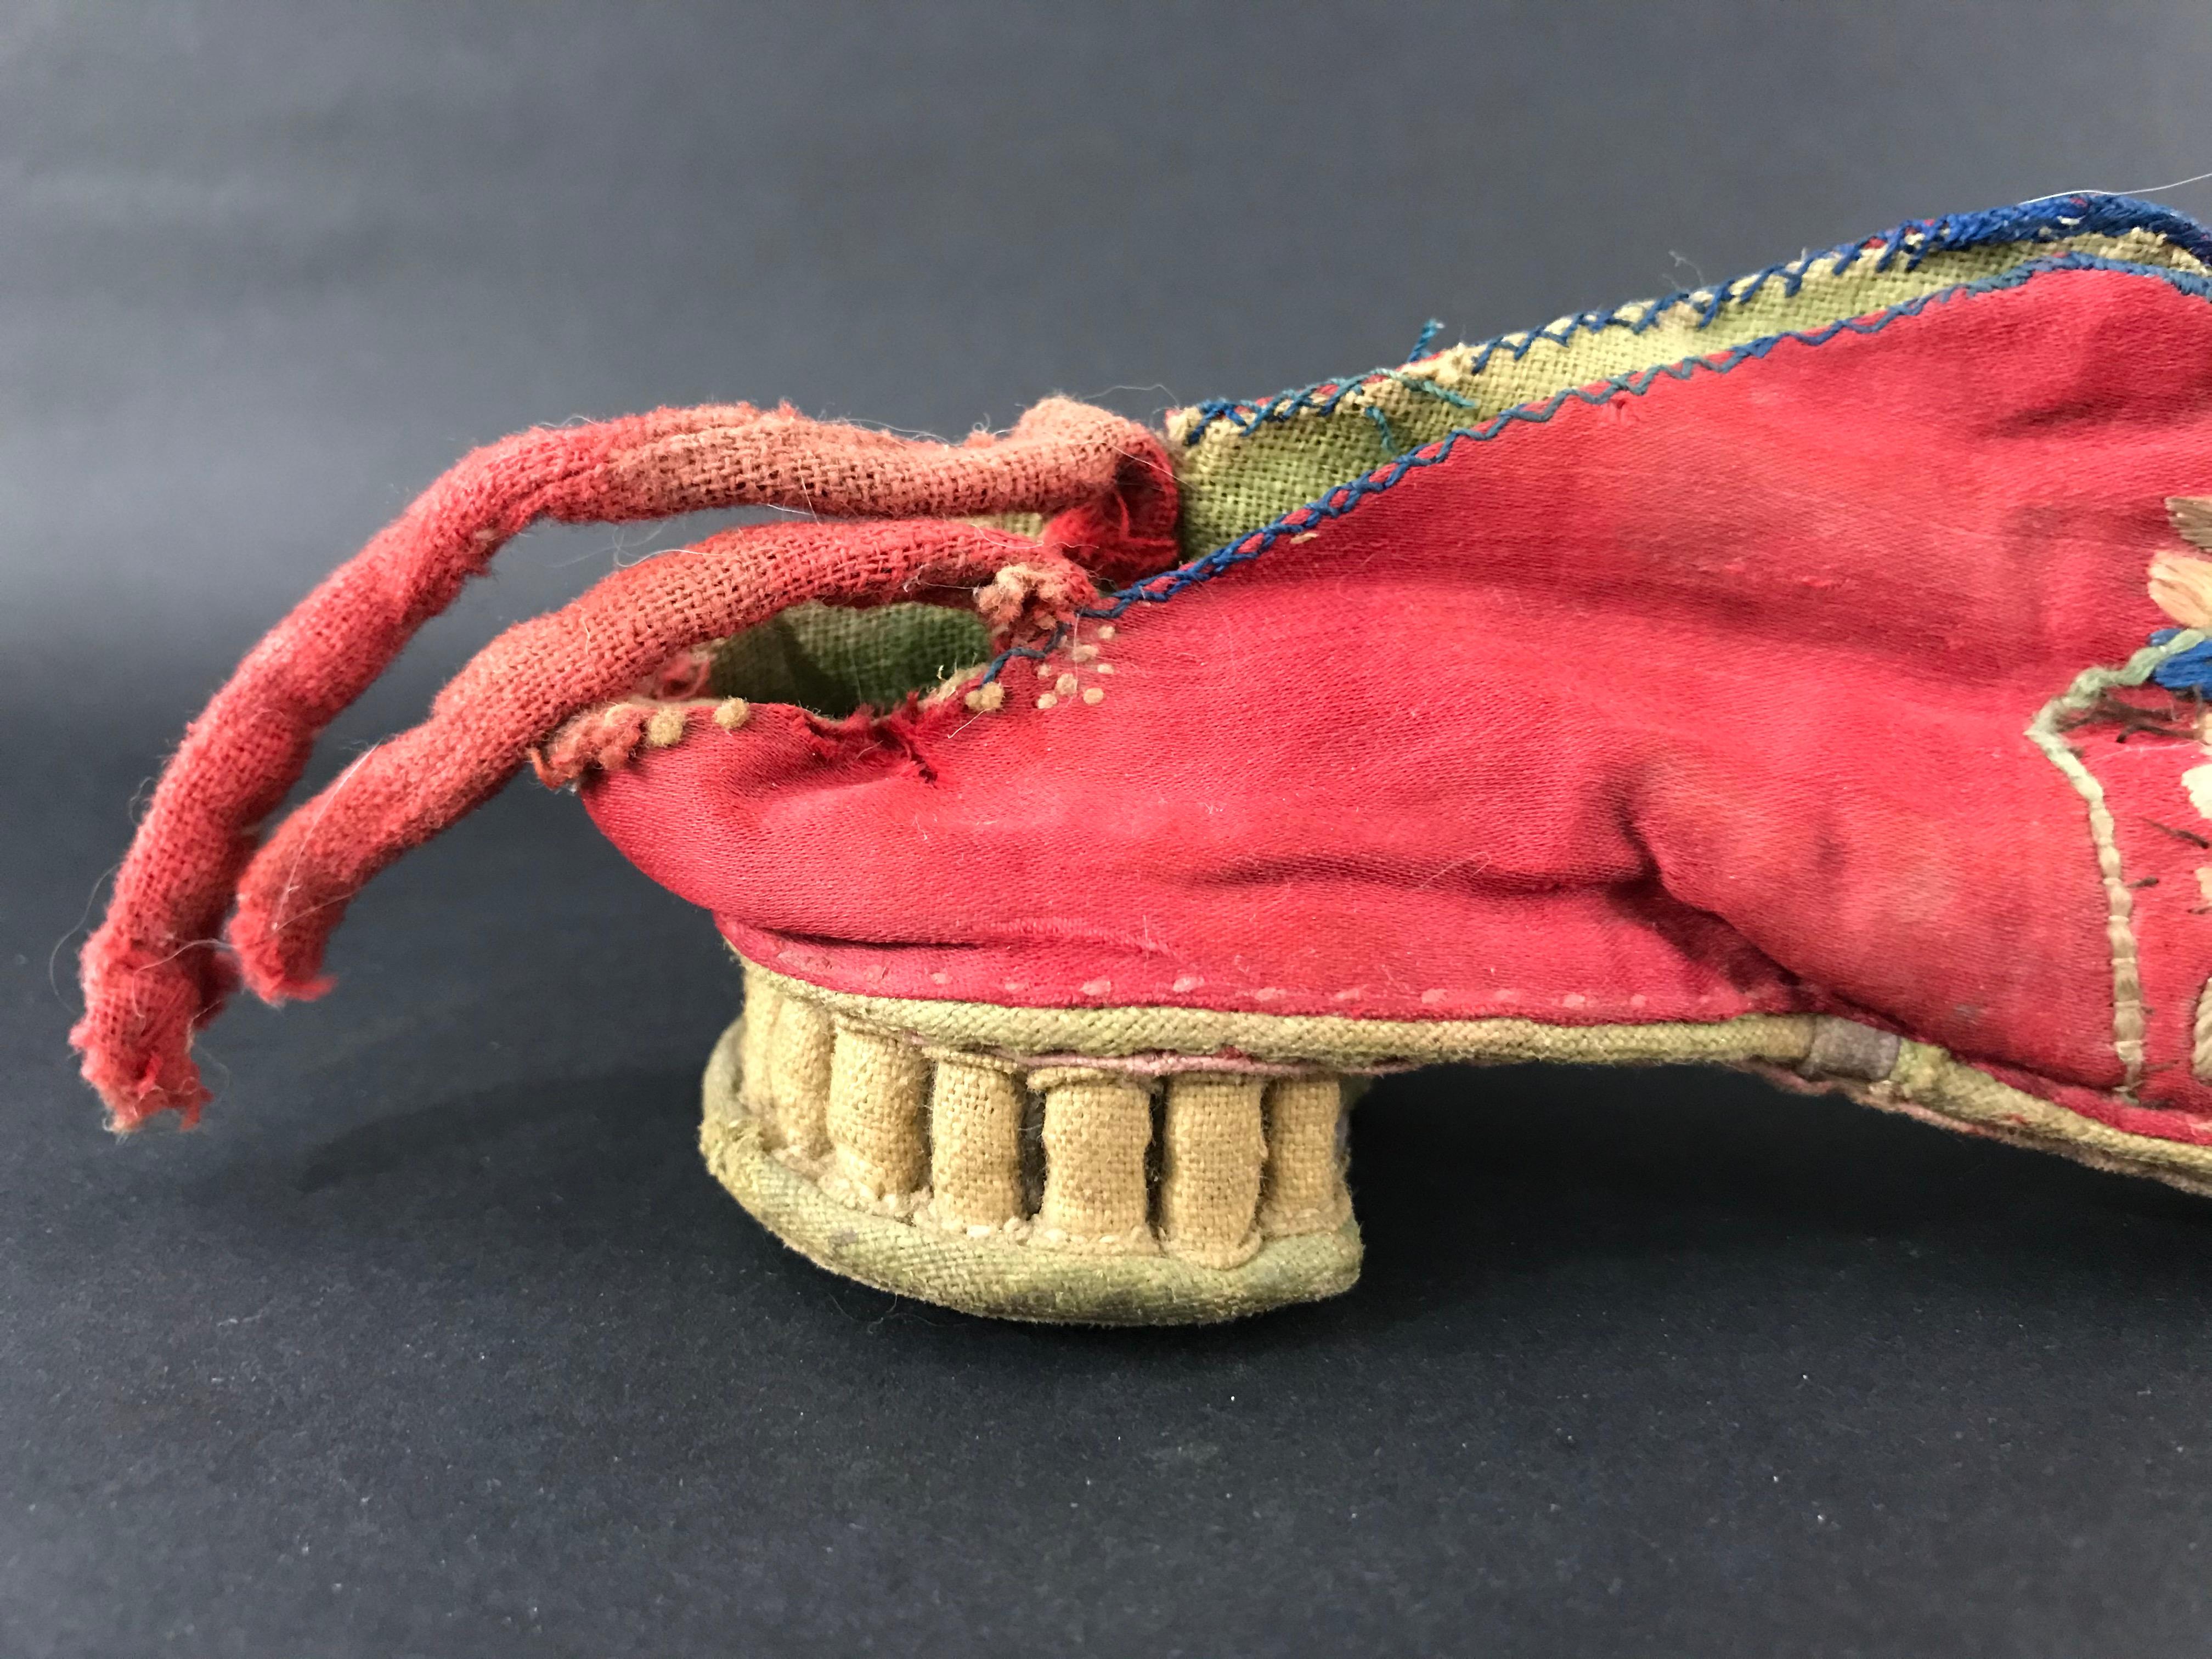 Woman's shoe with bandaged feet, in embroidered satin.
The custom of bandaged feet is said to have appeared in China in the 10th century during the Tang Dynasty, when the emperor asked his concubine to bandage his feet to perform the lotus dance